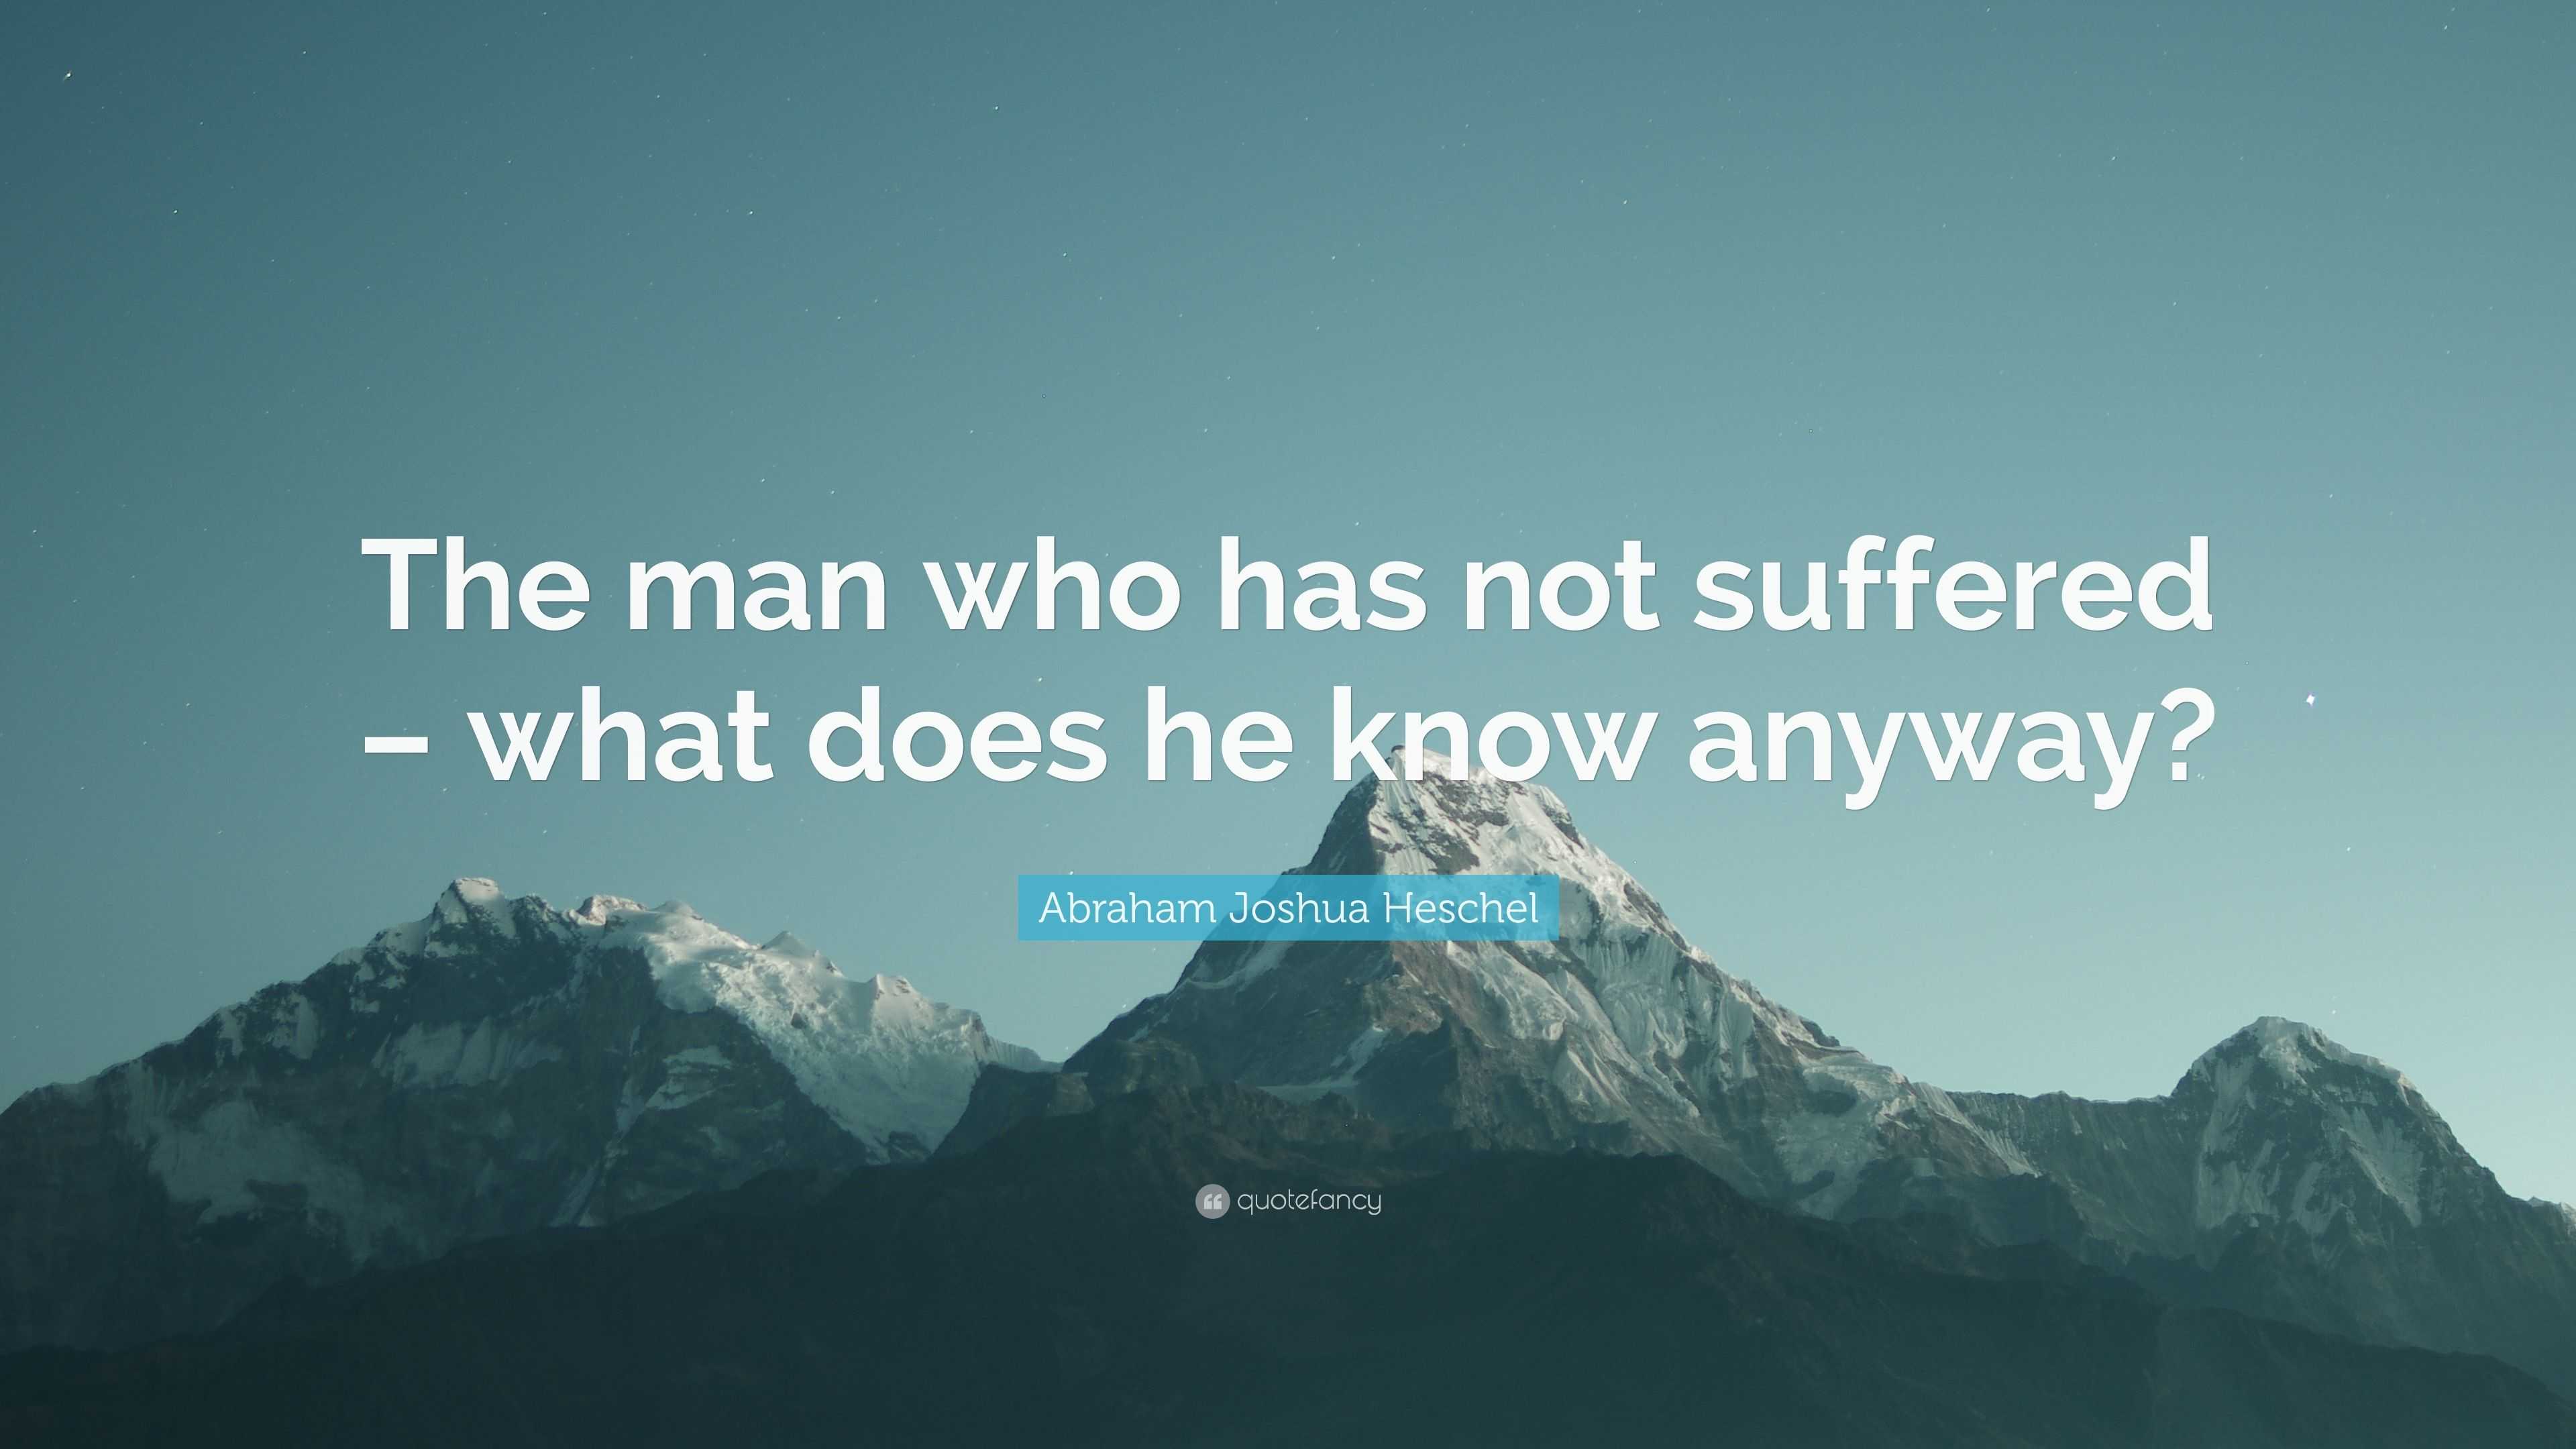 Abraham Joshua Heschel Quote: “The man who has not suffered – what does ...